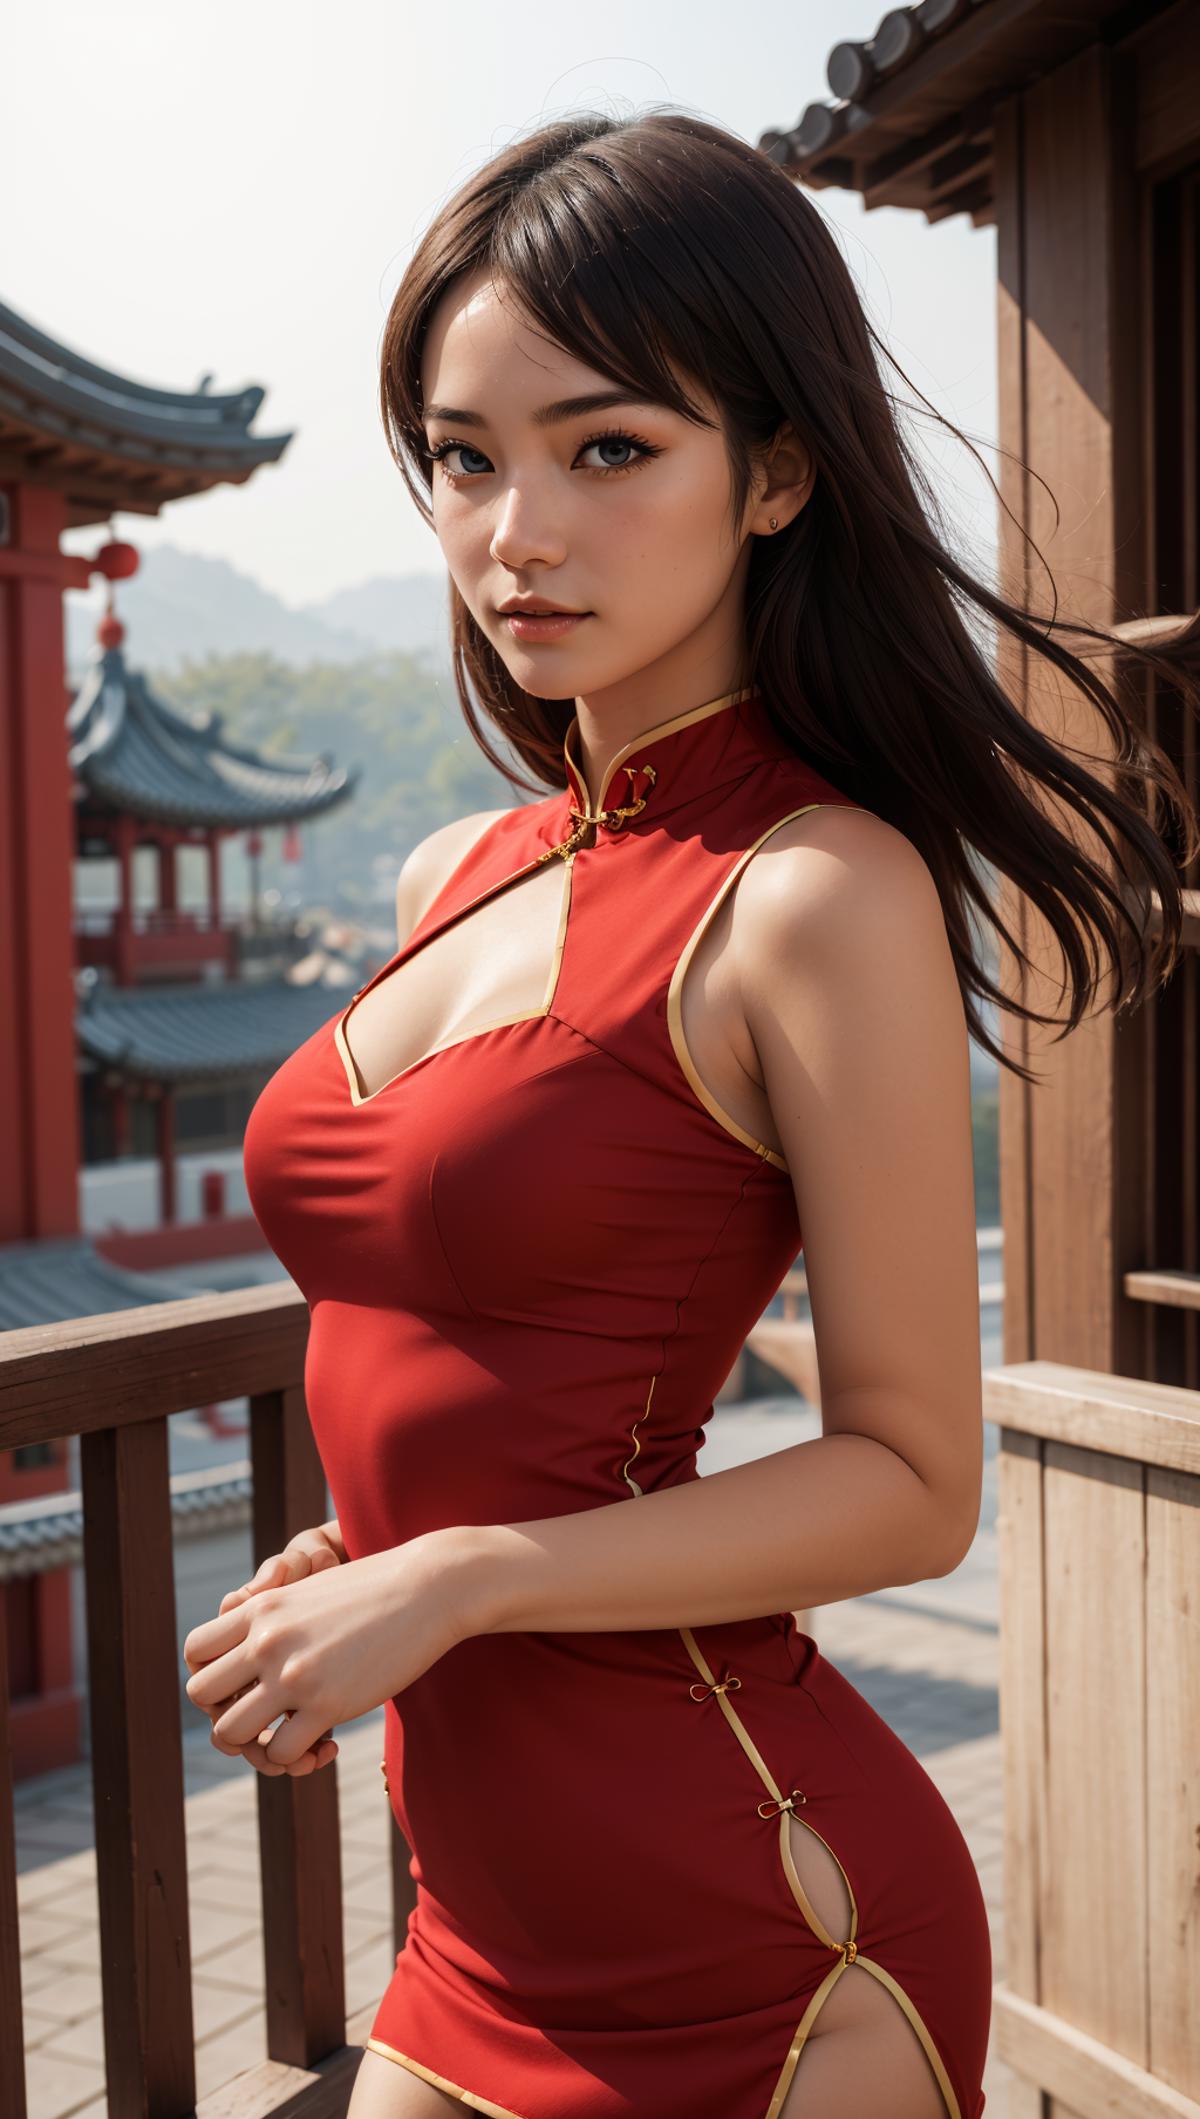 A beautiful young woman in a red dress poses in front of a Chinese temple.